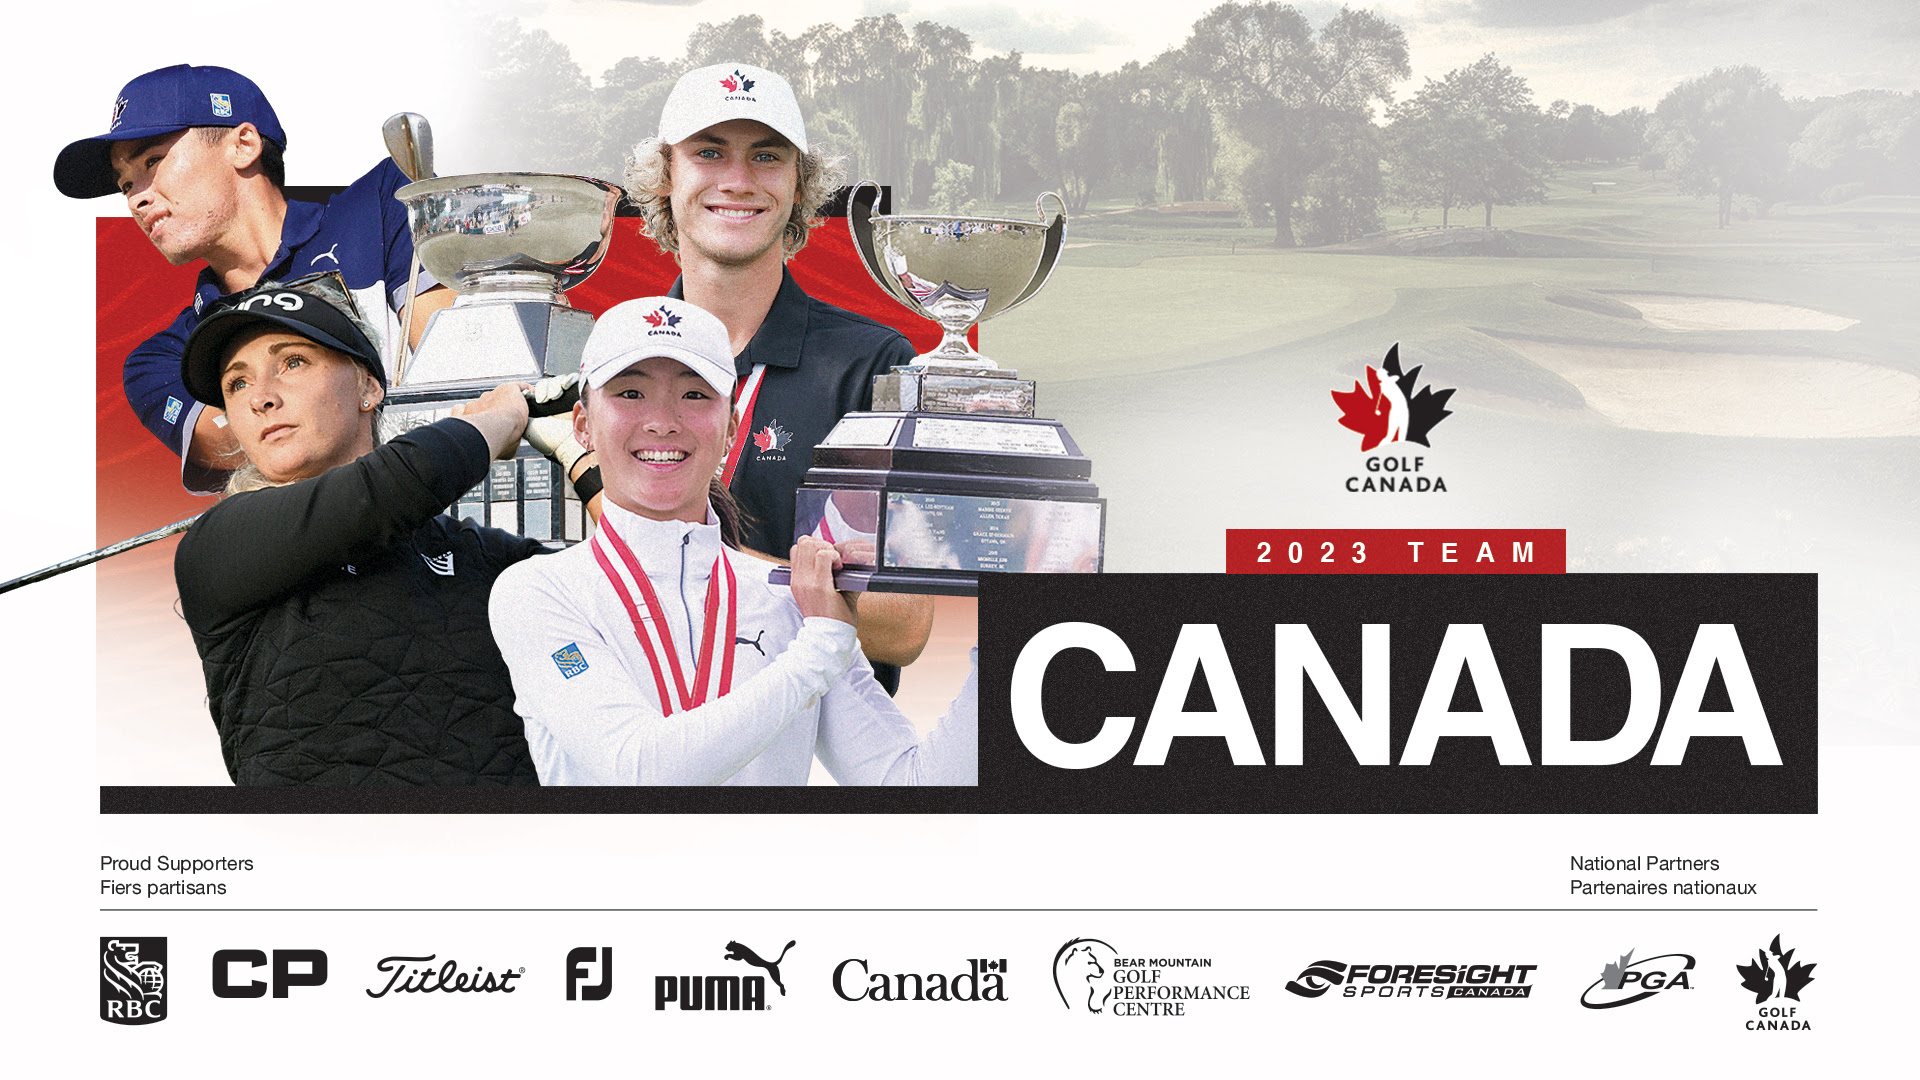 Canadian golfers poised to set national PGA Tour record this week